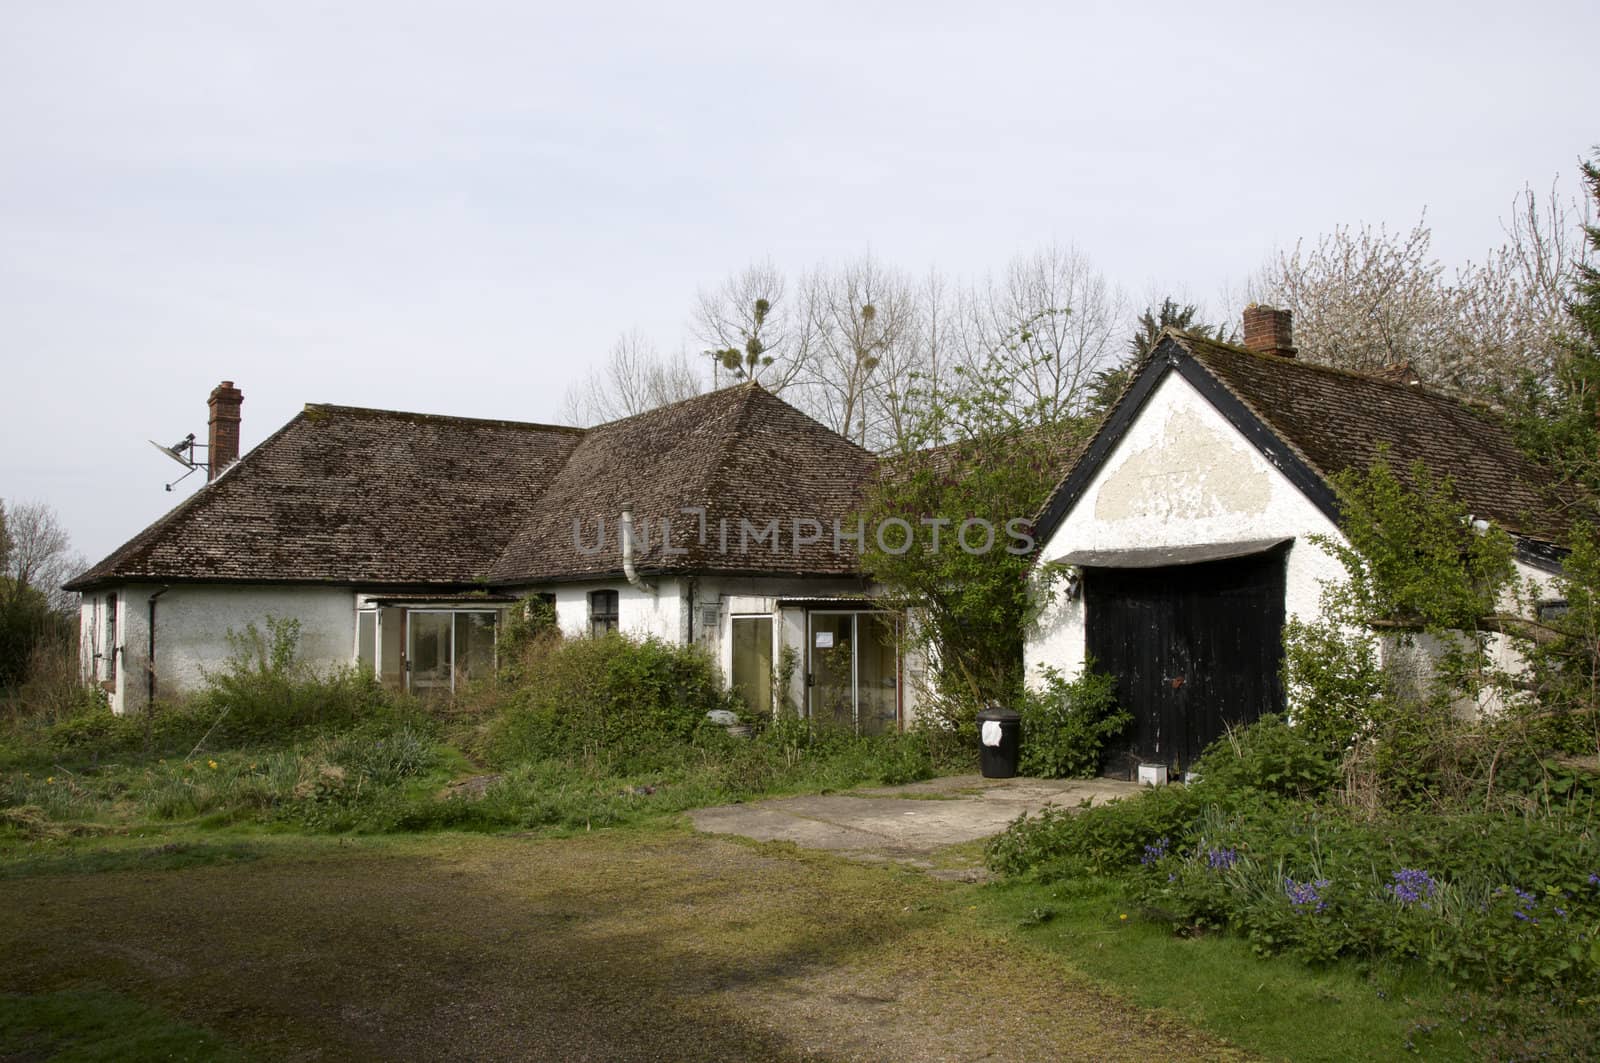 An old run-down and abandoned bungalow in the English countryside